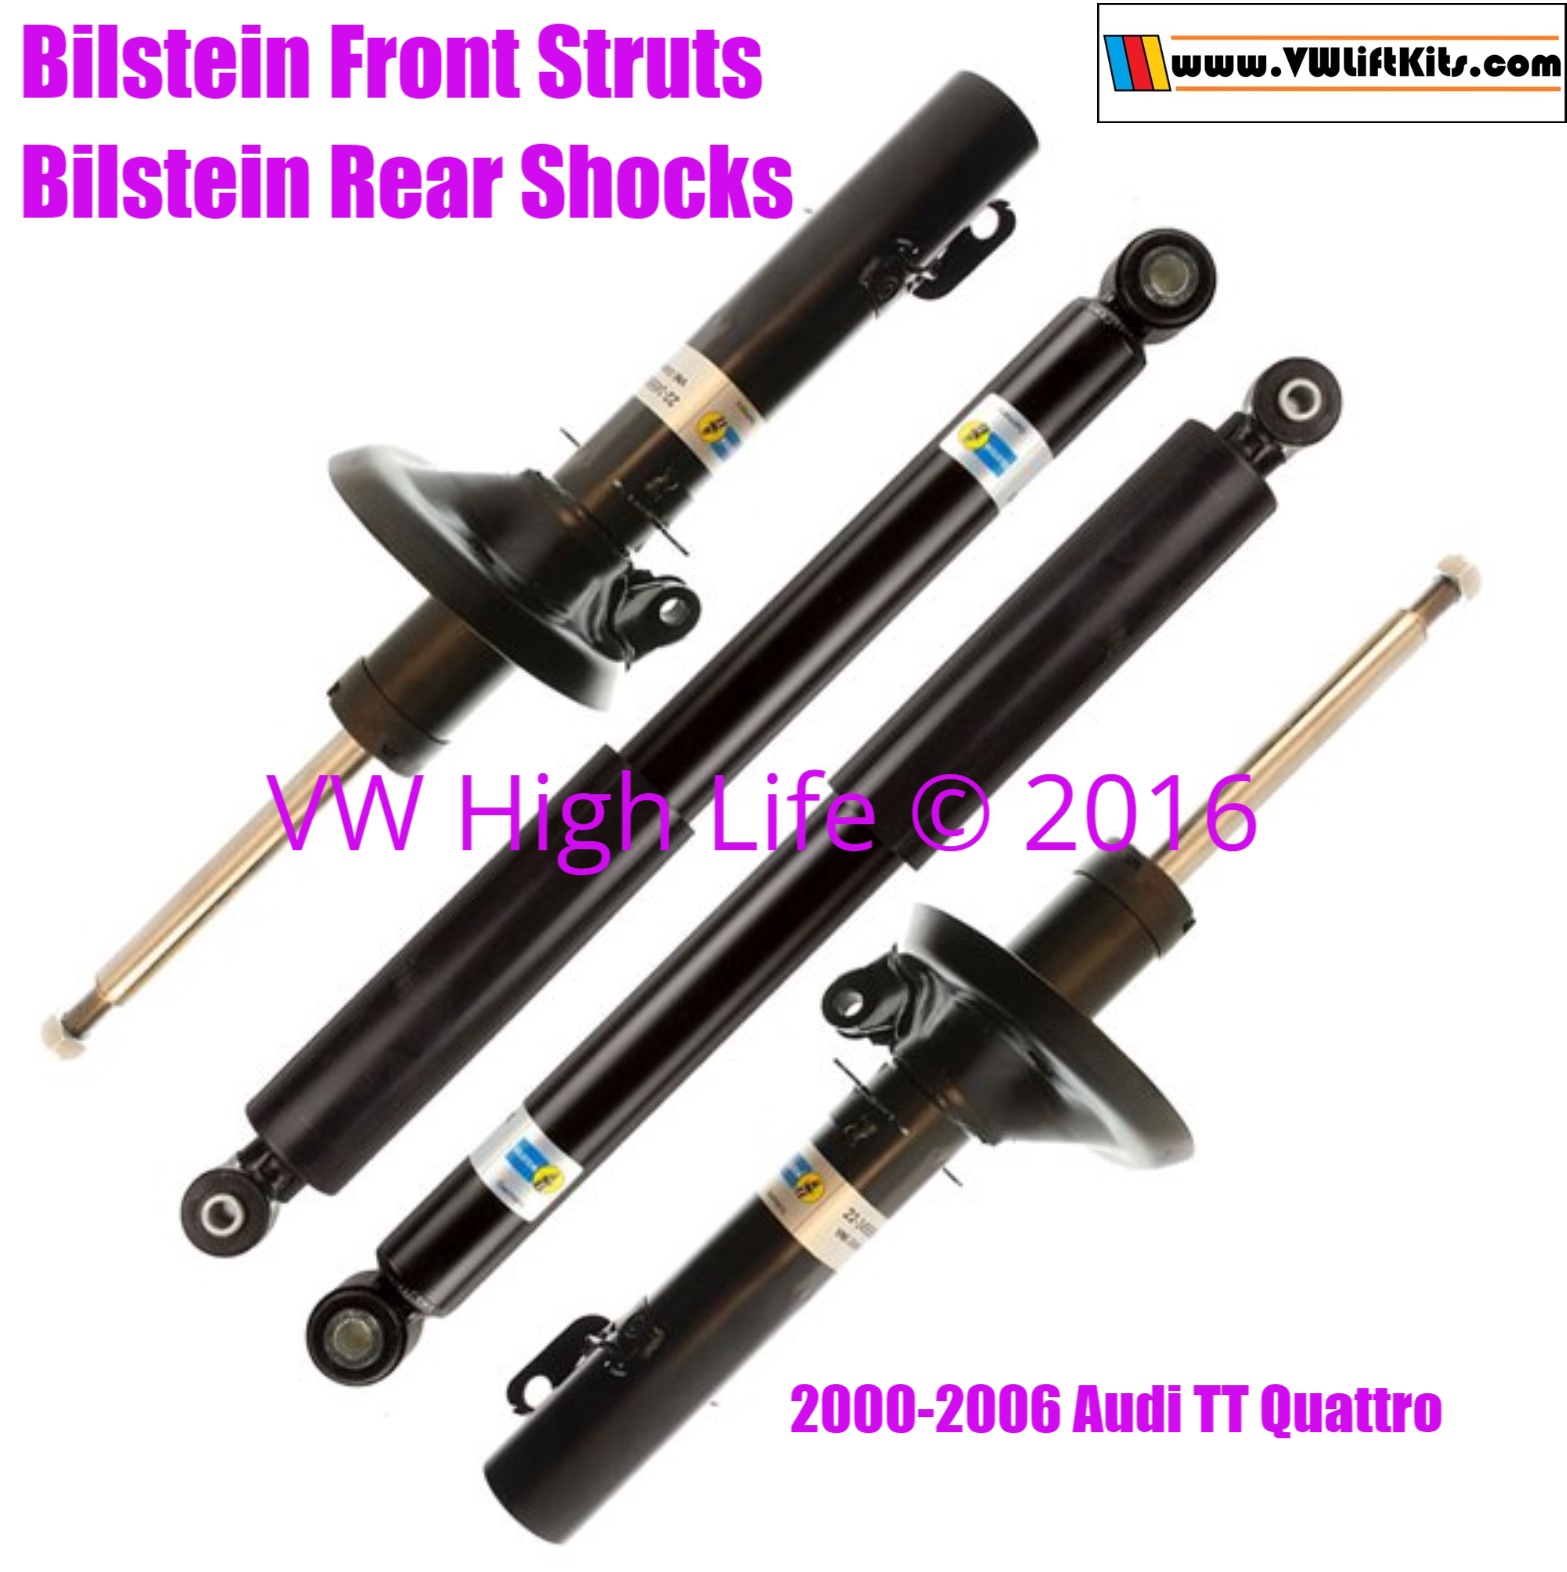 Bilstein Front Struts and Rear Shocks for MK1 2000-2006 Audi TT Quattro. Used in the Stage 1 & 2 Kits.